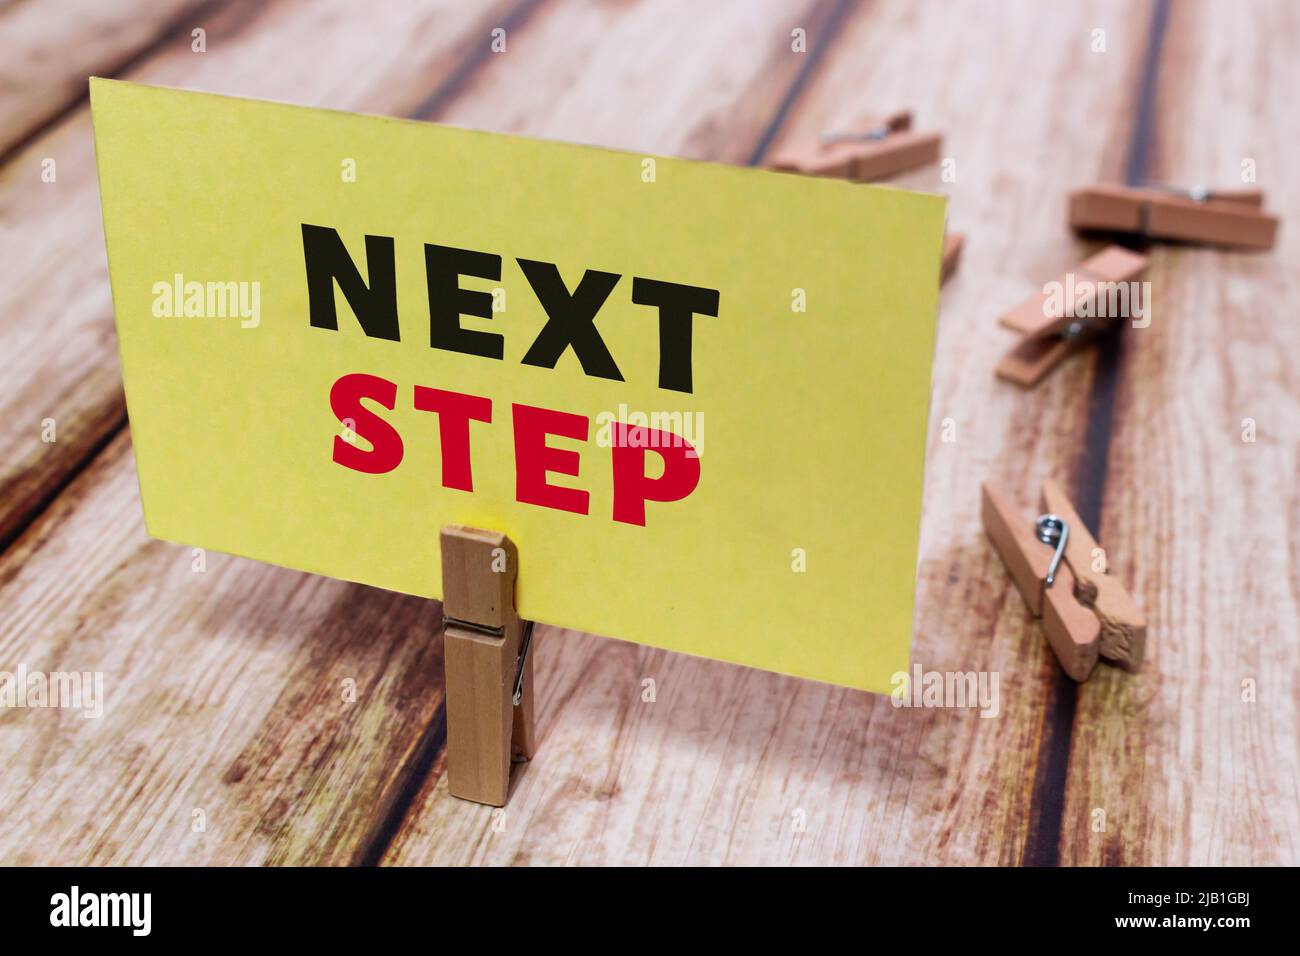 Message card “Next Step” on shabby wooden table. Natural wooden pinch holding yellow paper note. Keep trying to achieve the personal goal. Stock Photo